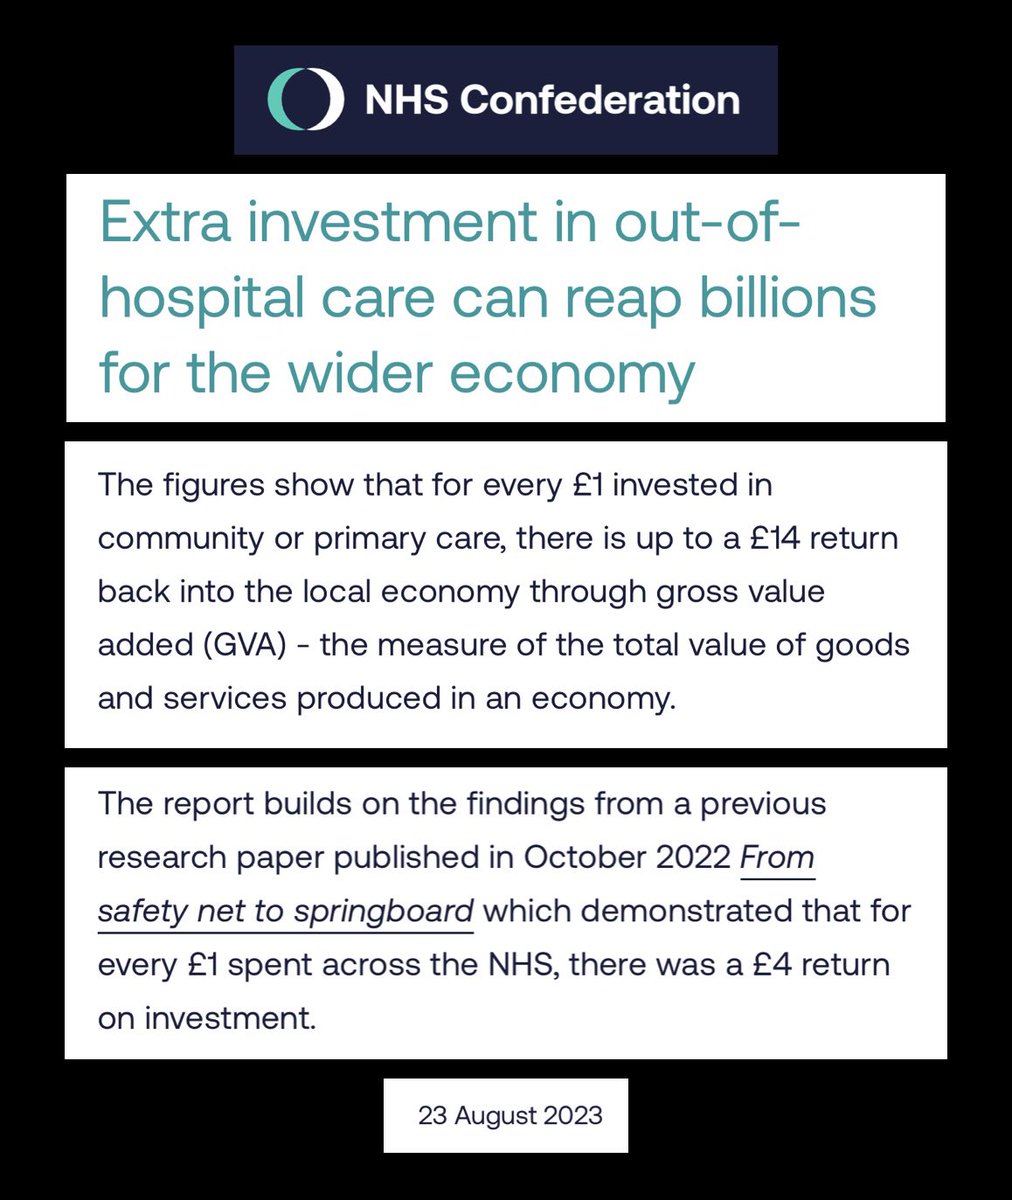 Dear 🇬🇧, For every £1 invested in the NHS, we get £4 back in economic growth, but when we invest in GPs and community care, then the return is as high as £14 for every £1 invested! This election, demand a plan to reinvest in our communities by reinvesting in our NHS. #SOSNHS